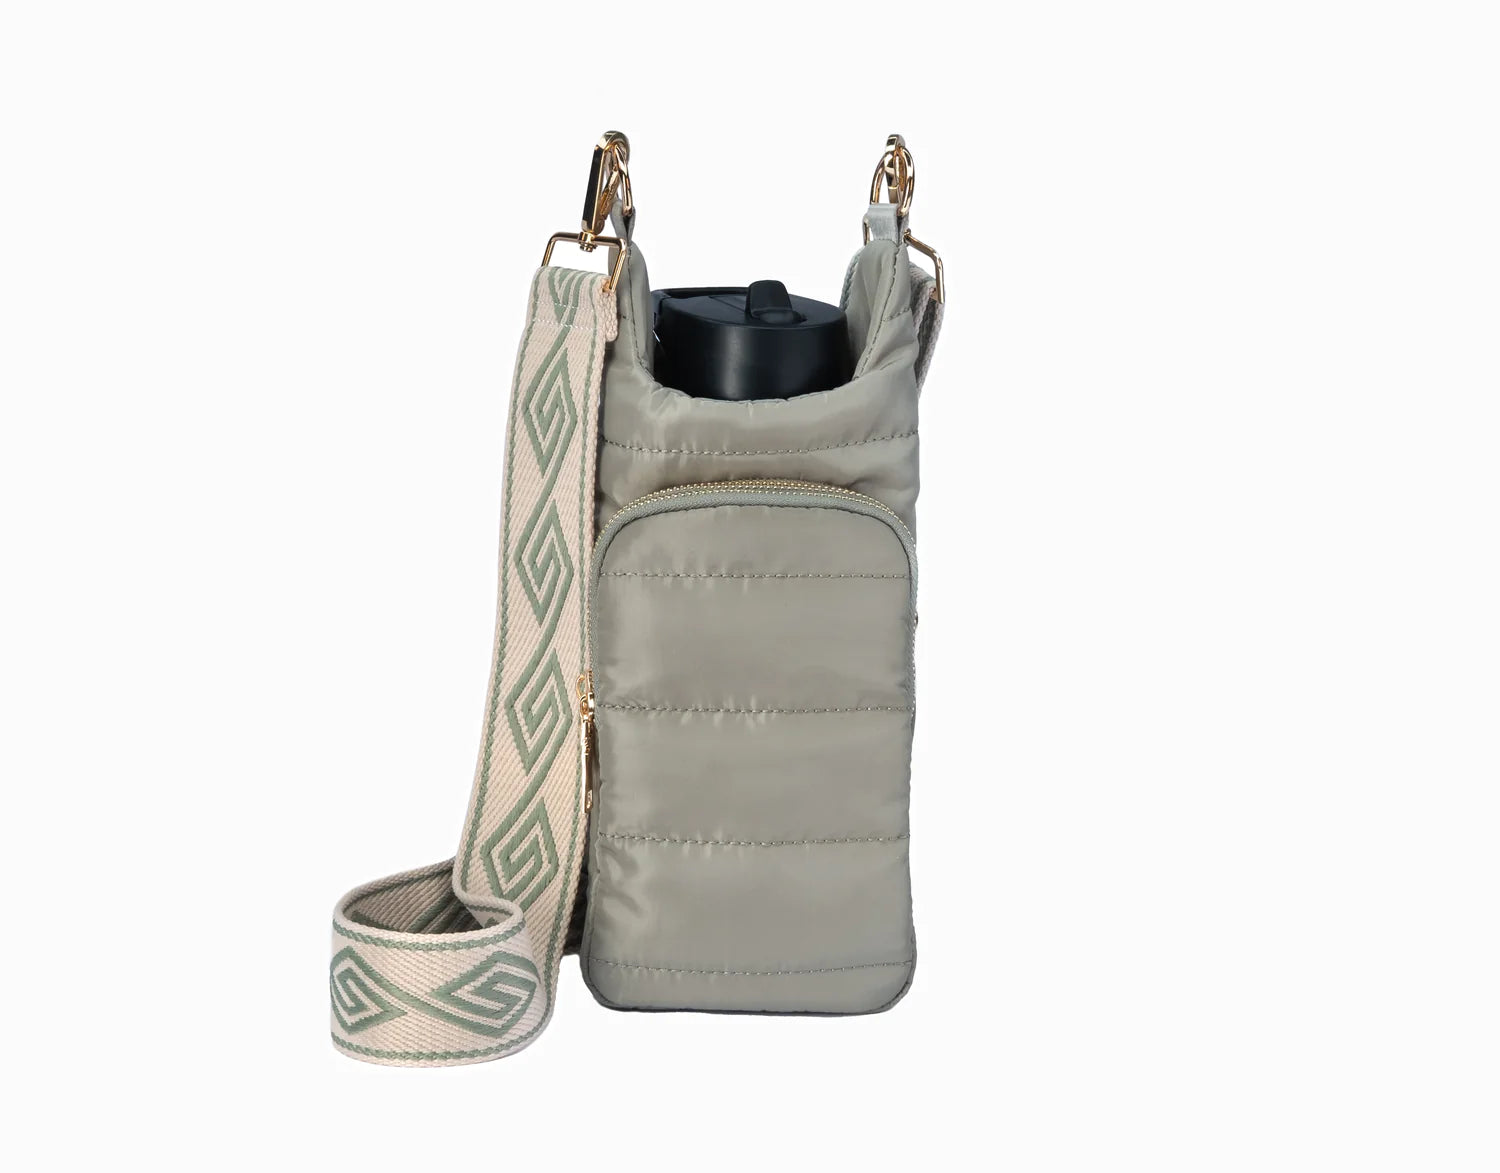 Wholesale Packs (4 or 10) - Sage Green HydroBag with Tan/Green Strap